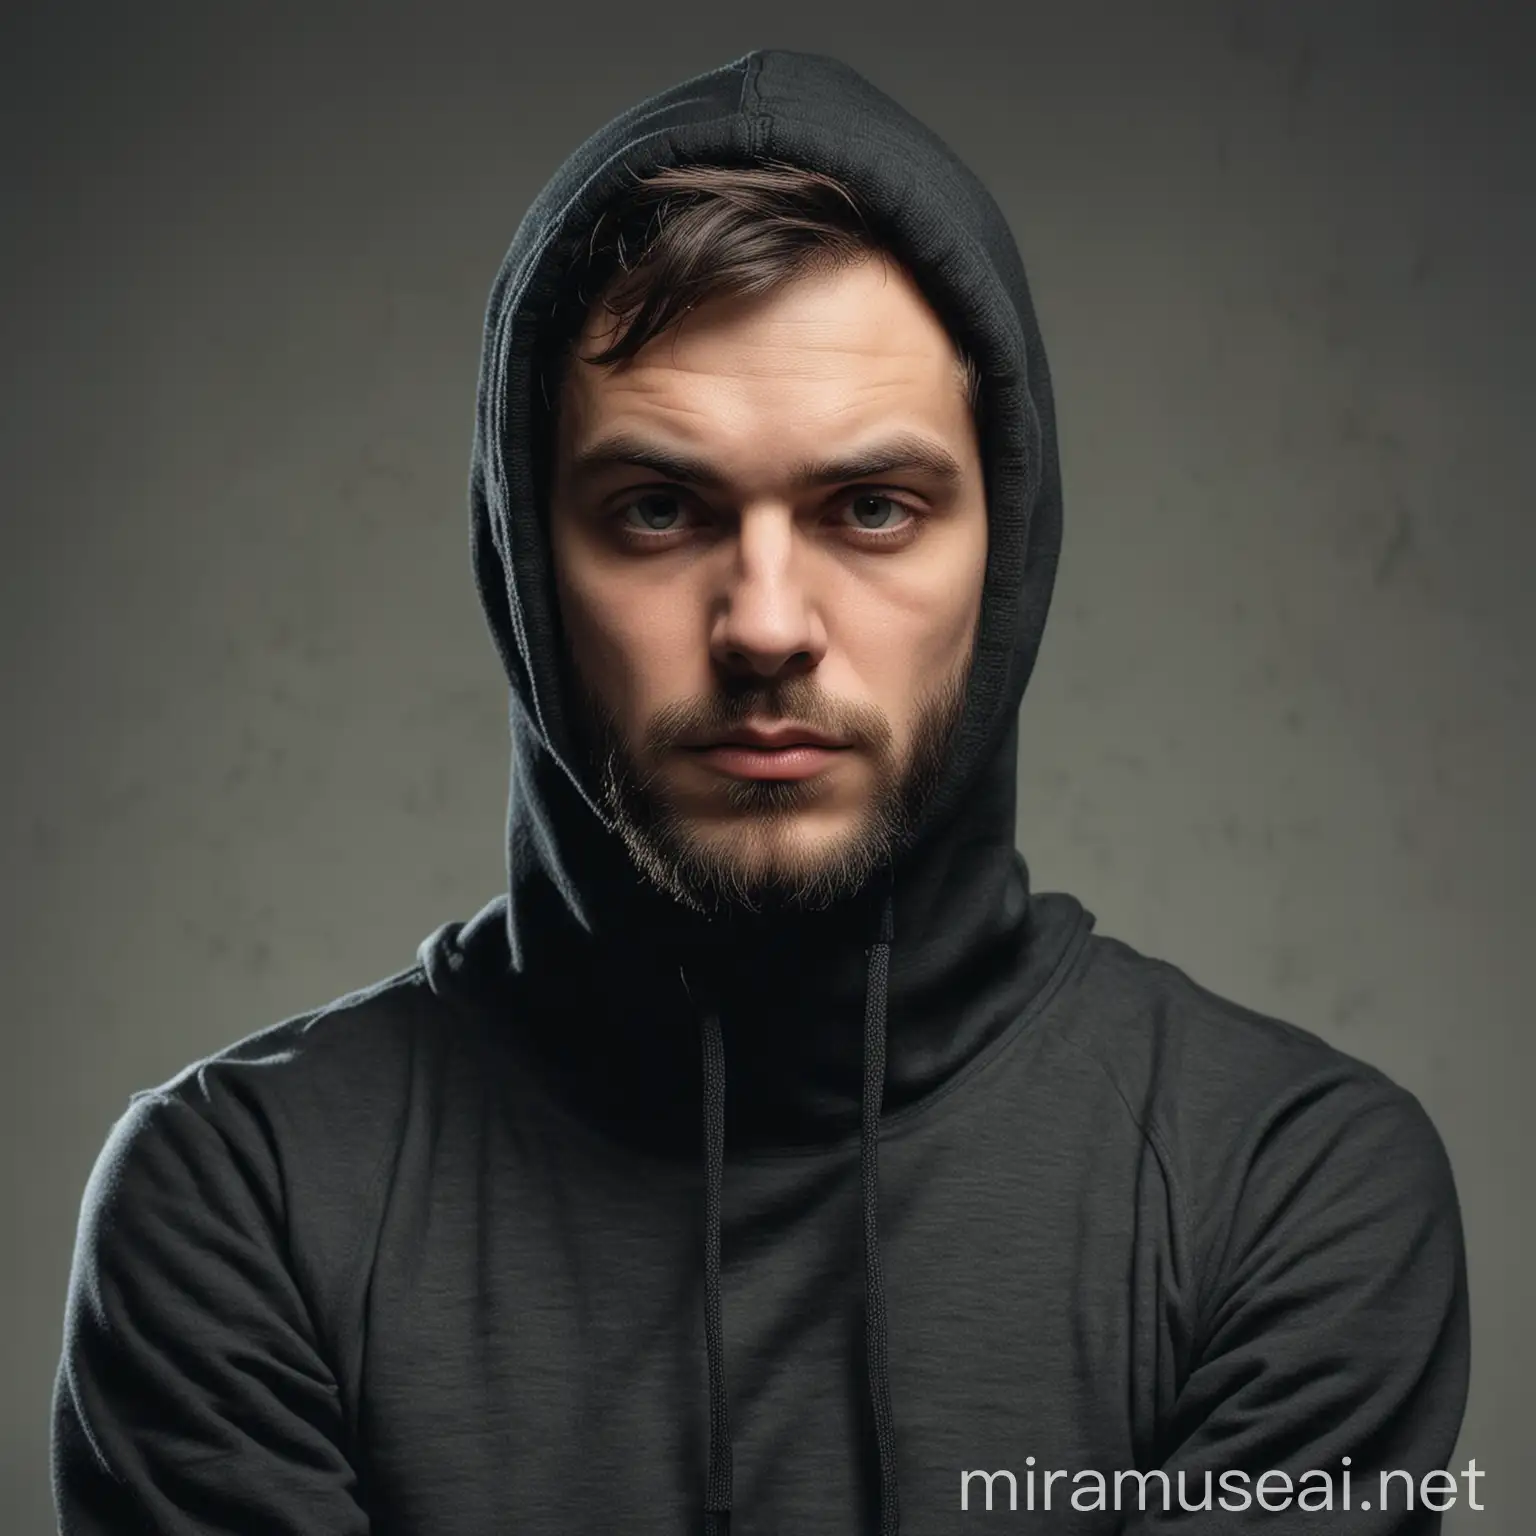 A serious man in a hoodie and a balaclava sits and looks forward